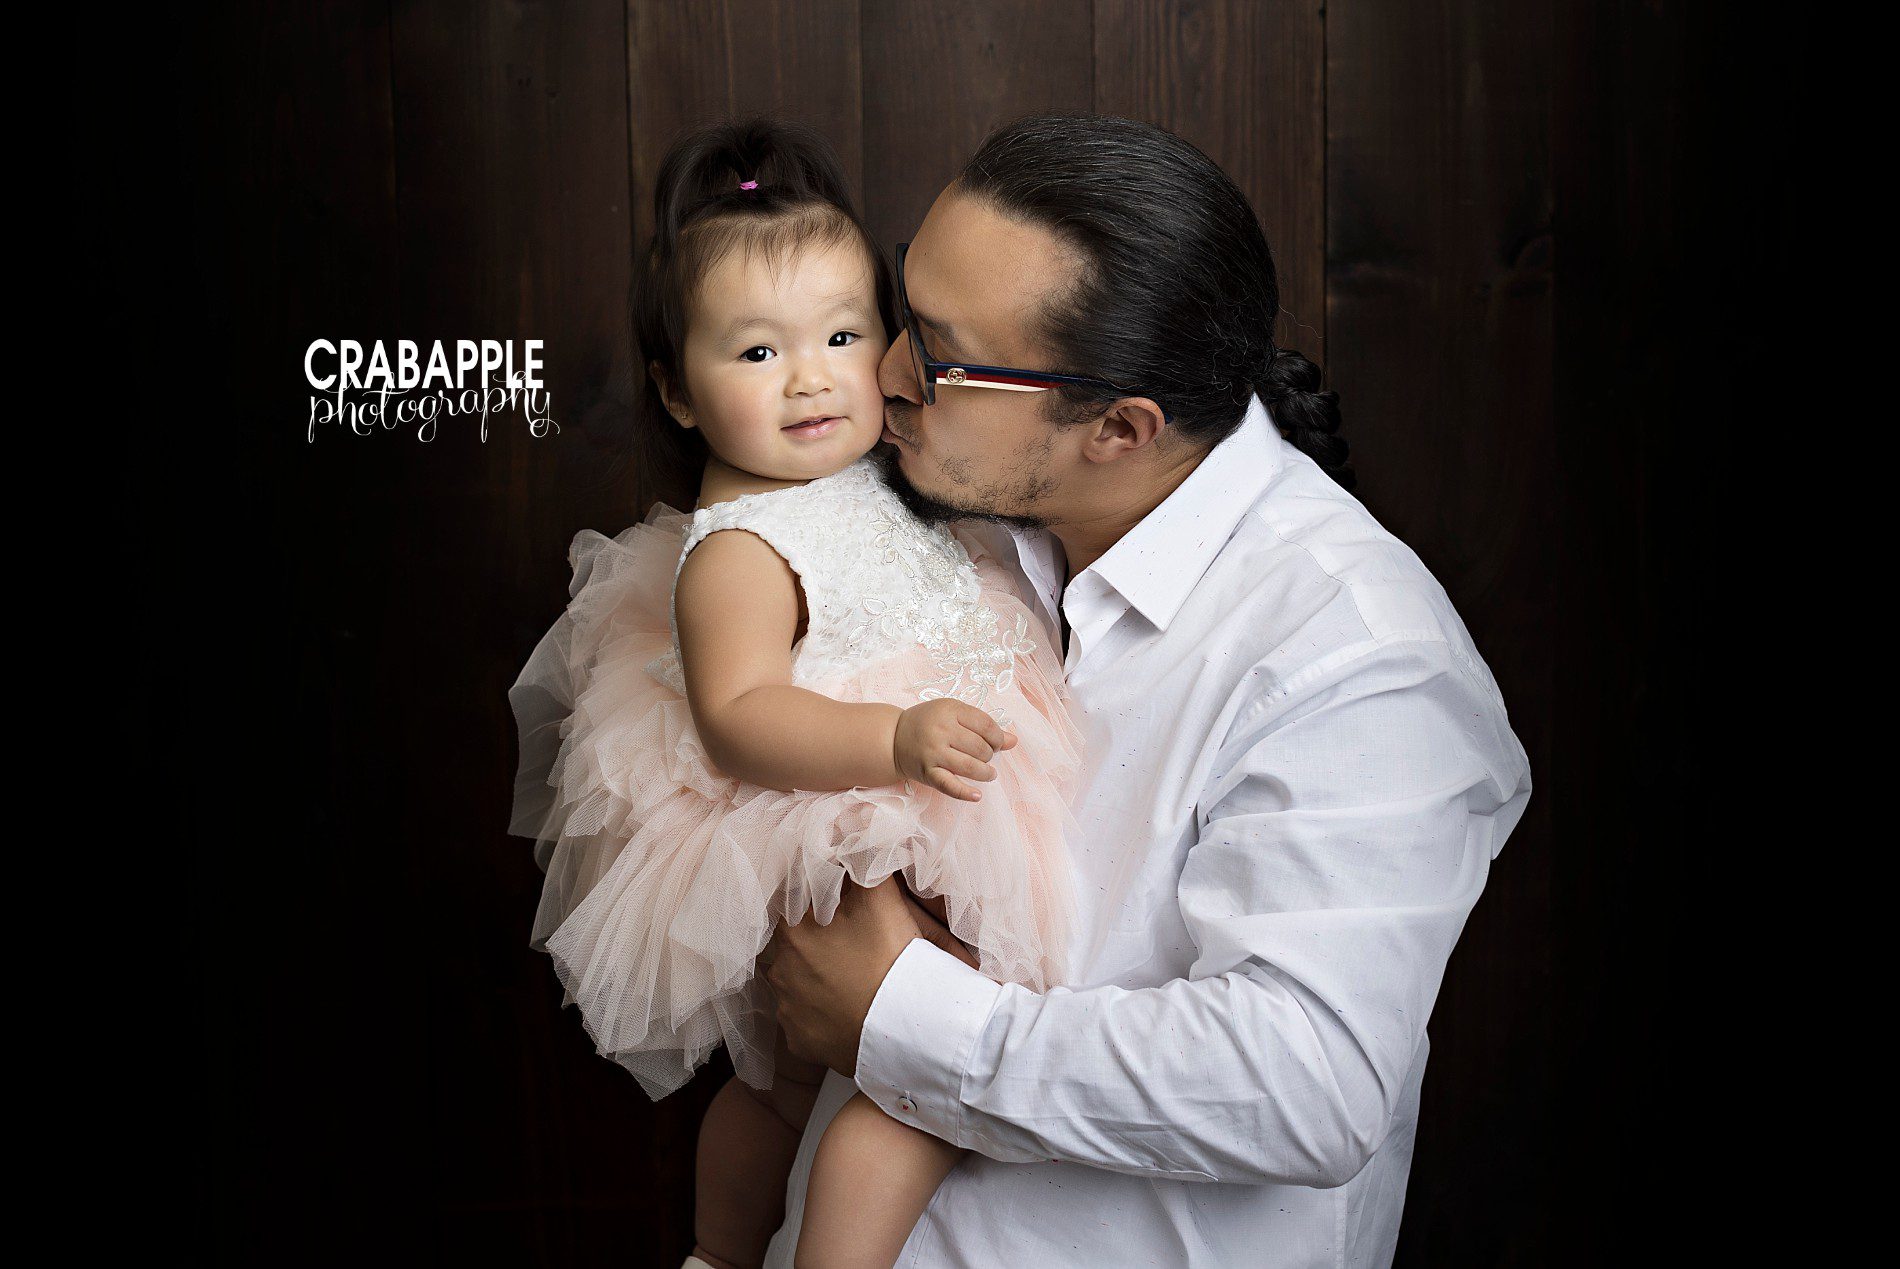 father daughter photo ideas for baby's first birthday